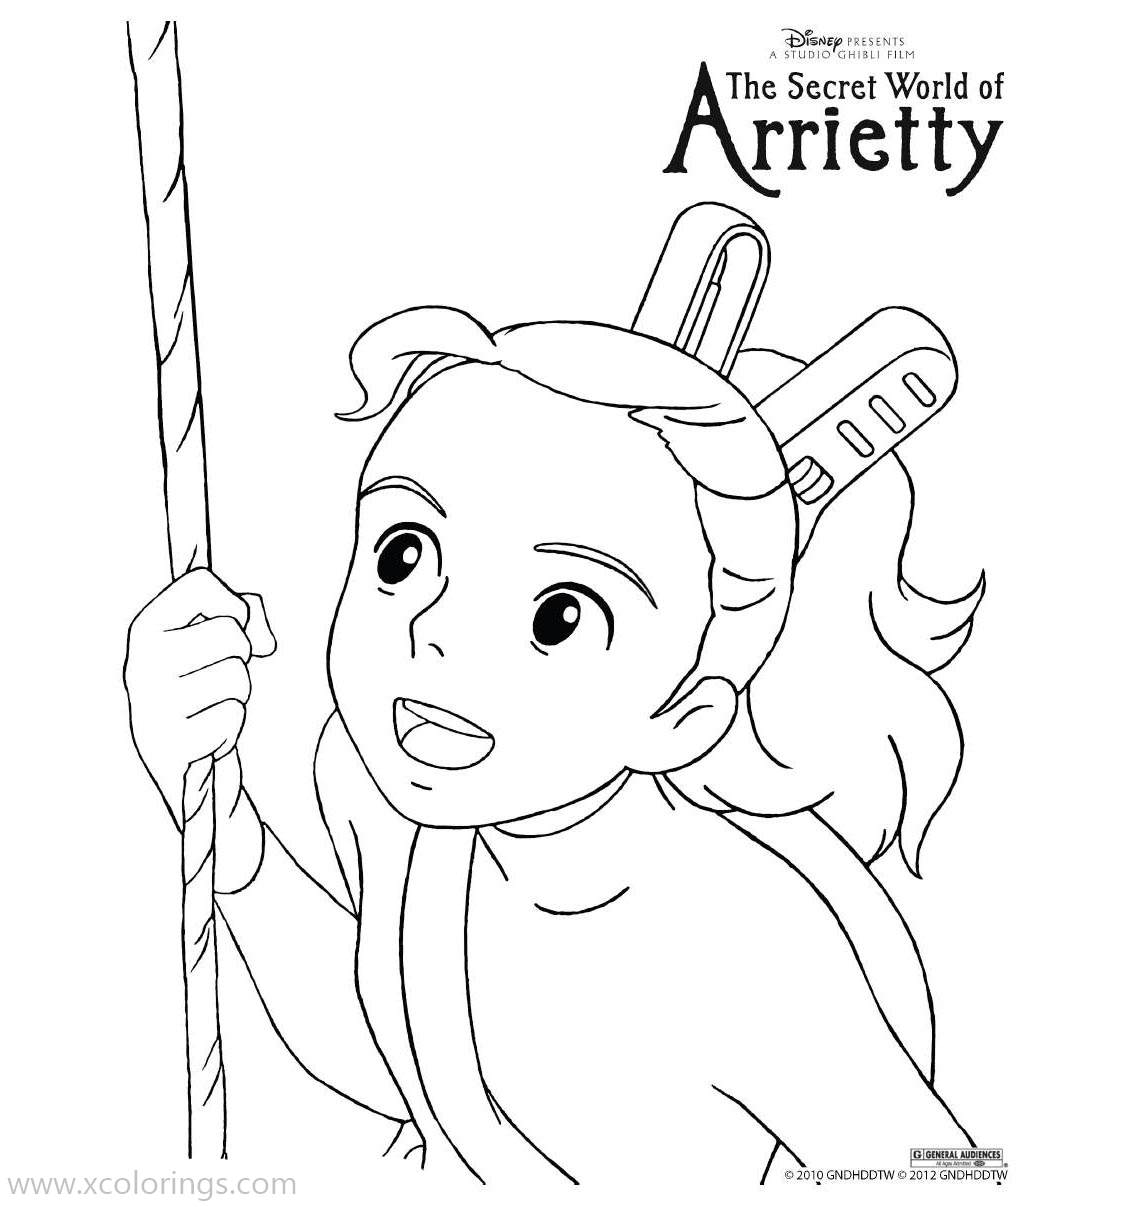 Free The Secret World of Arrietty Coloring Pages Arrietty the Borrower printable